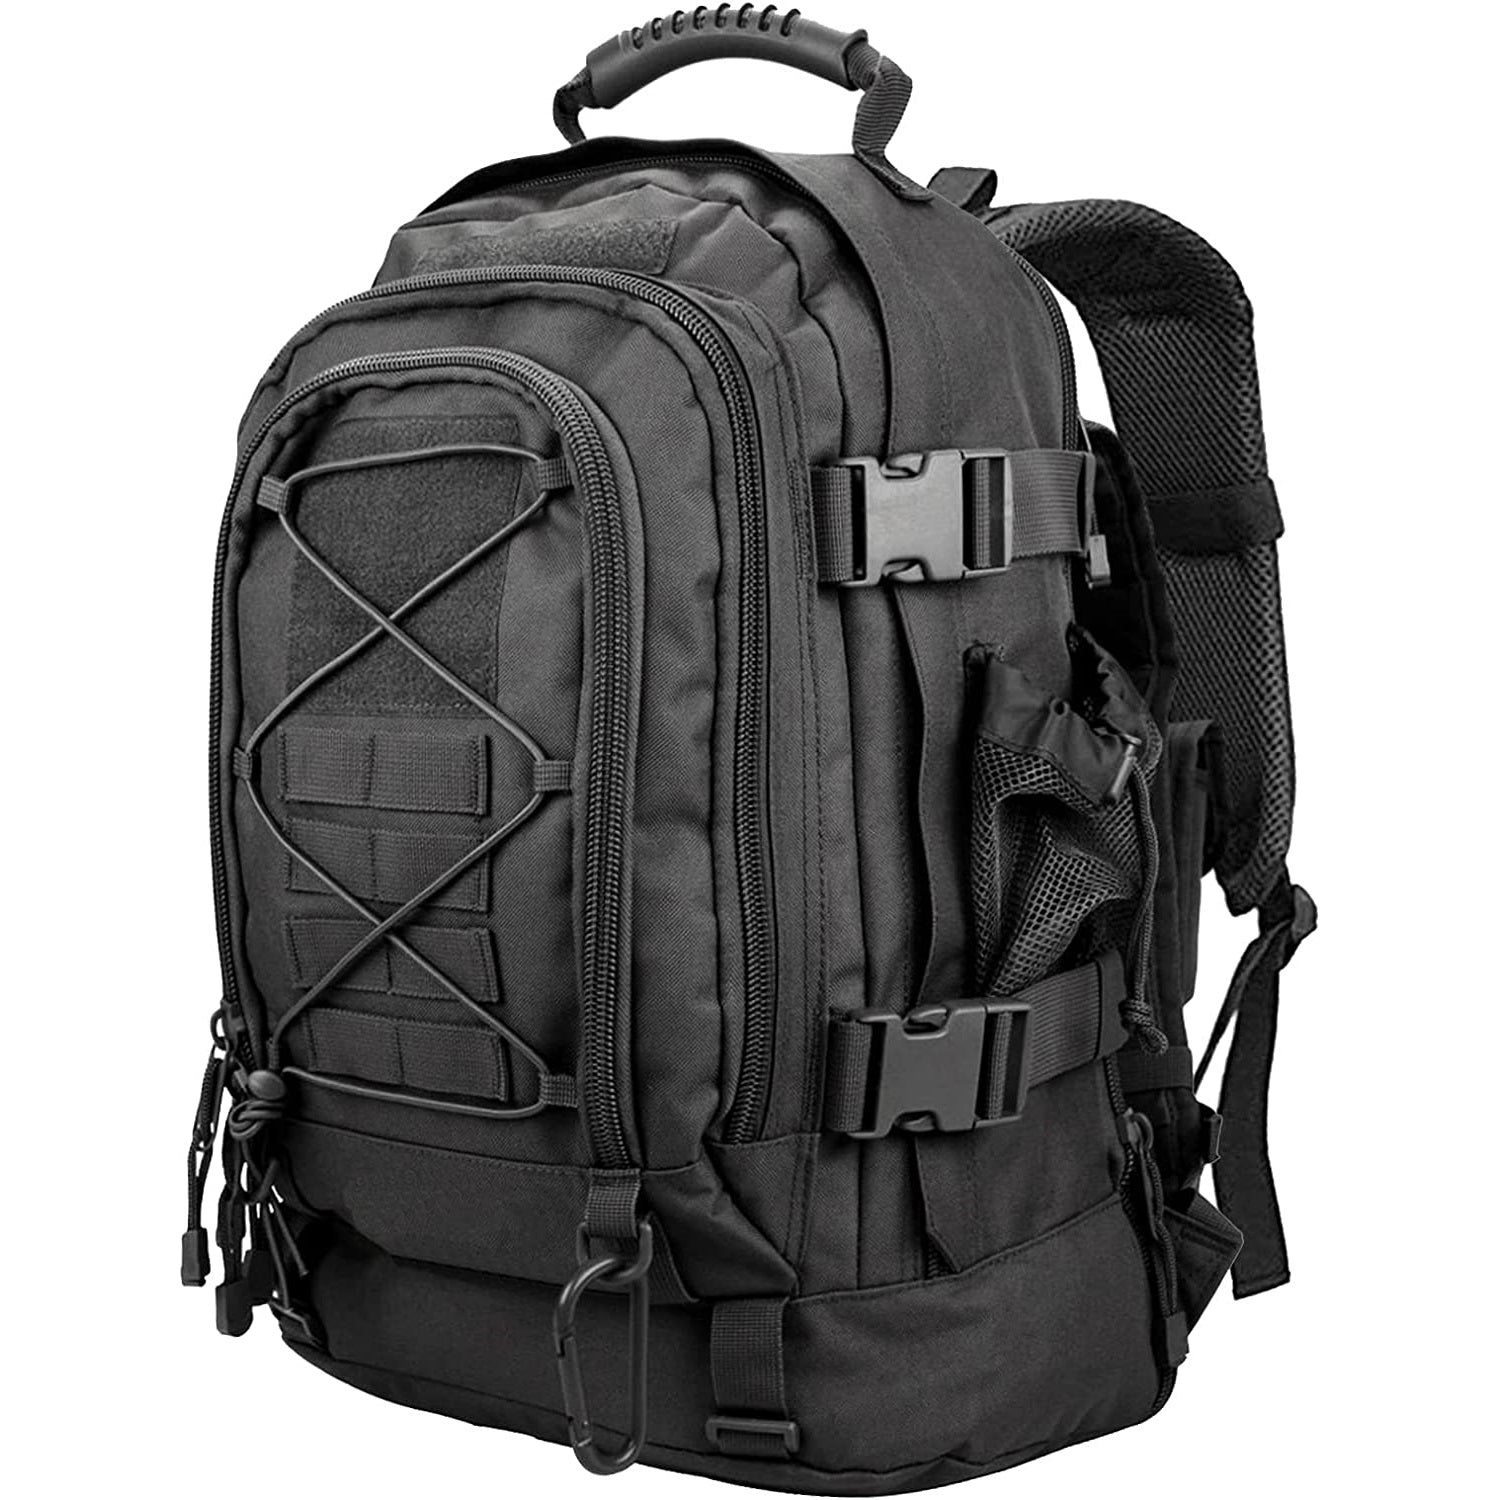 Large Capacity Military Tactical Hiking Expandable 39L-60L Backpack